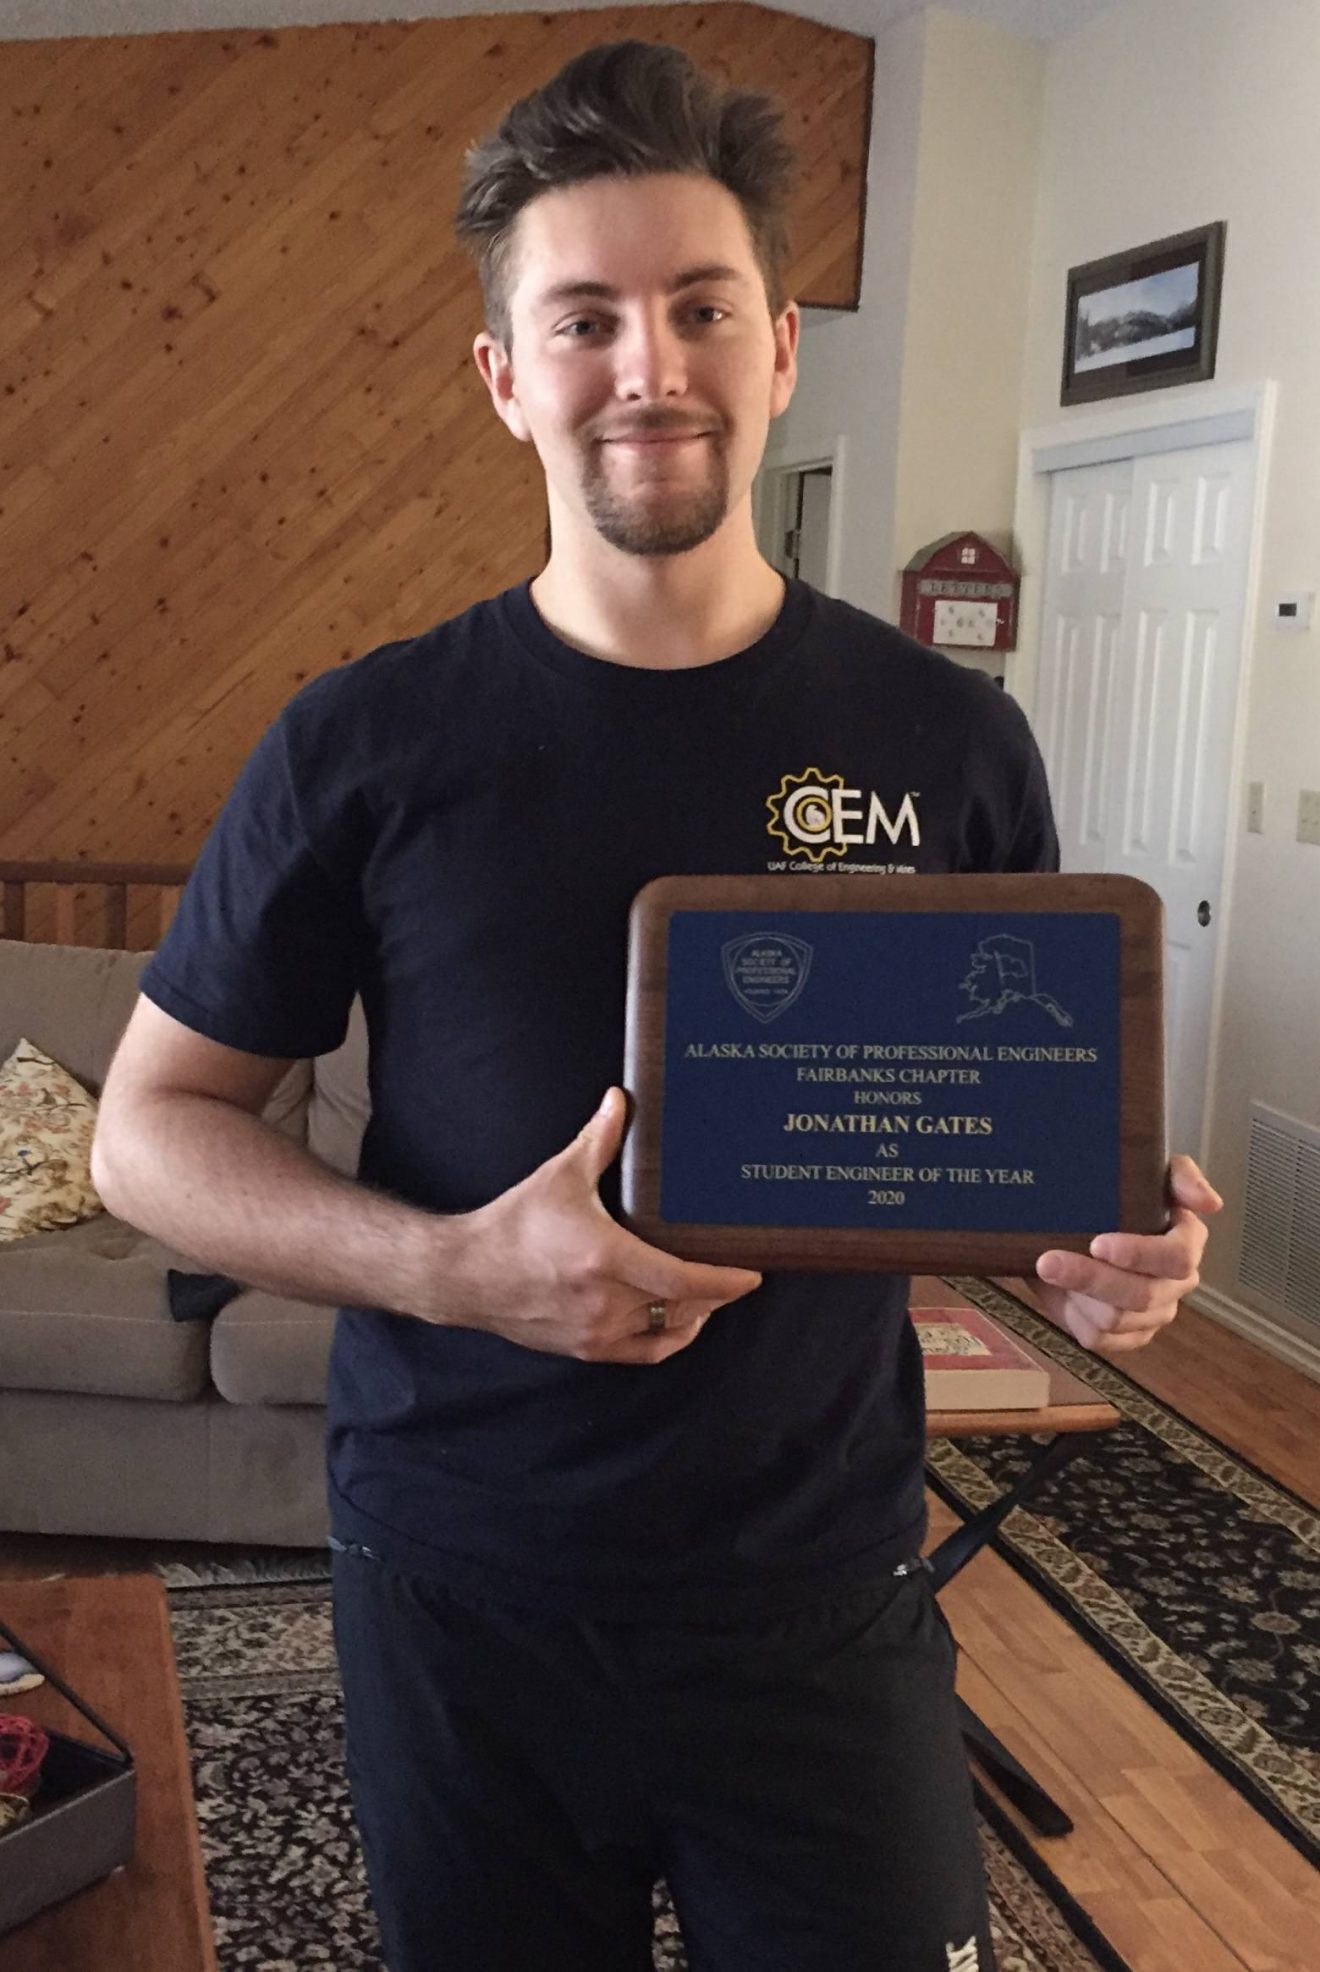 Jonathan Gates stands in a living room holding a plaque.